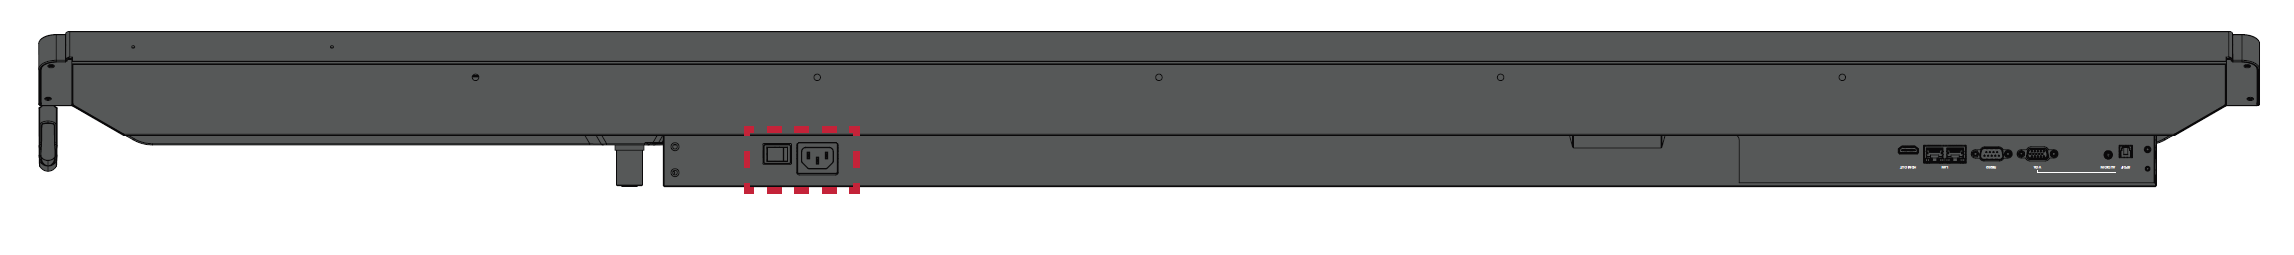 IFP52-1C Power Switch.png